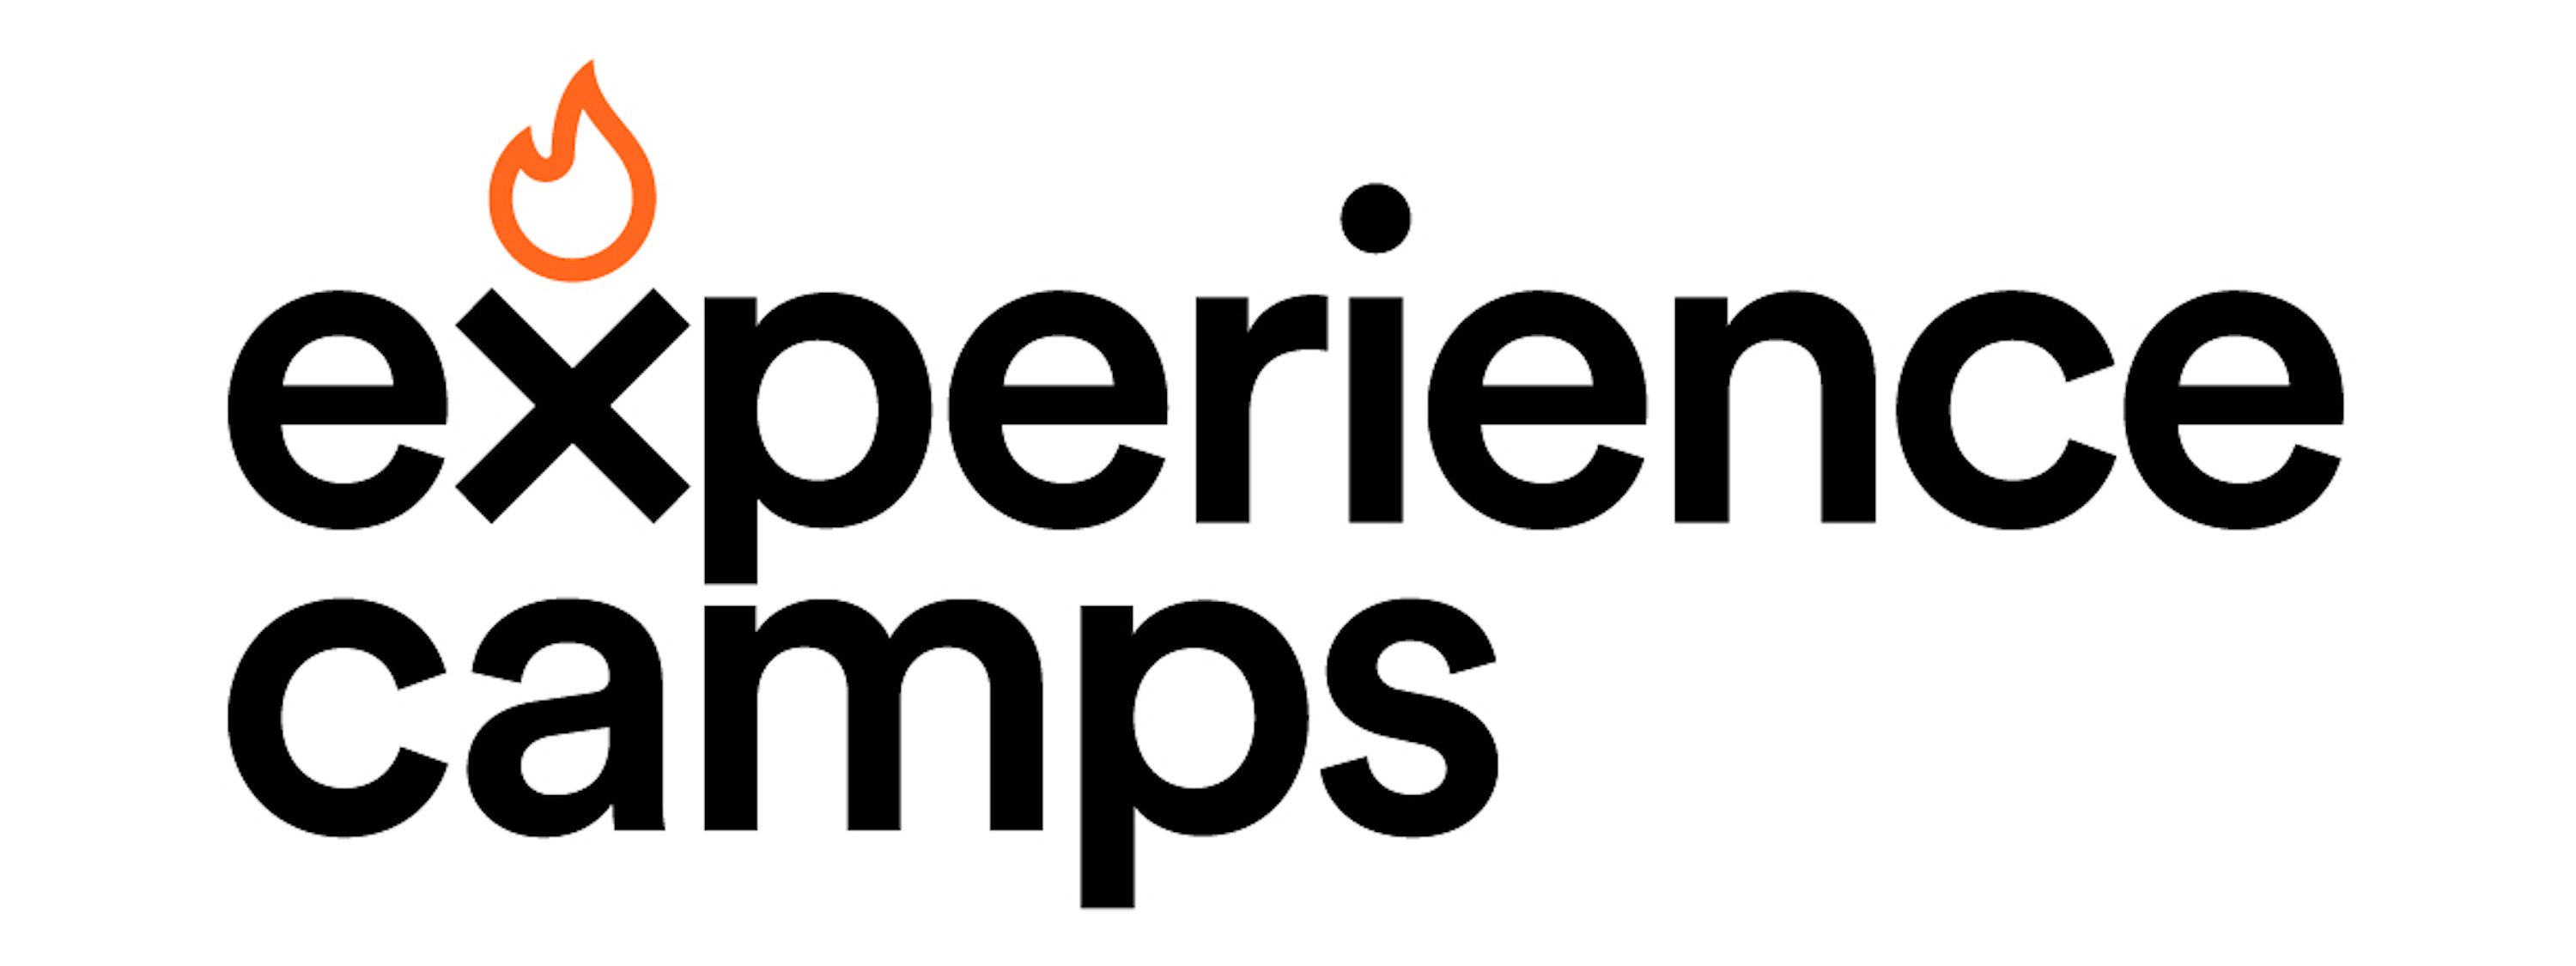 Adam Katz's fundraising page for Experience Camps